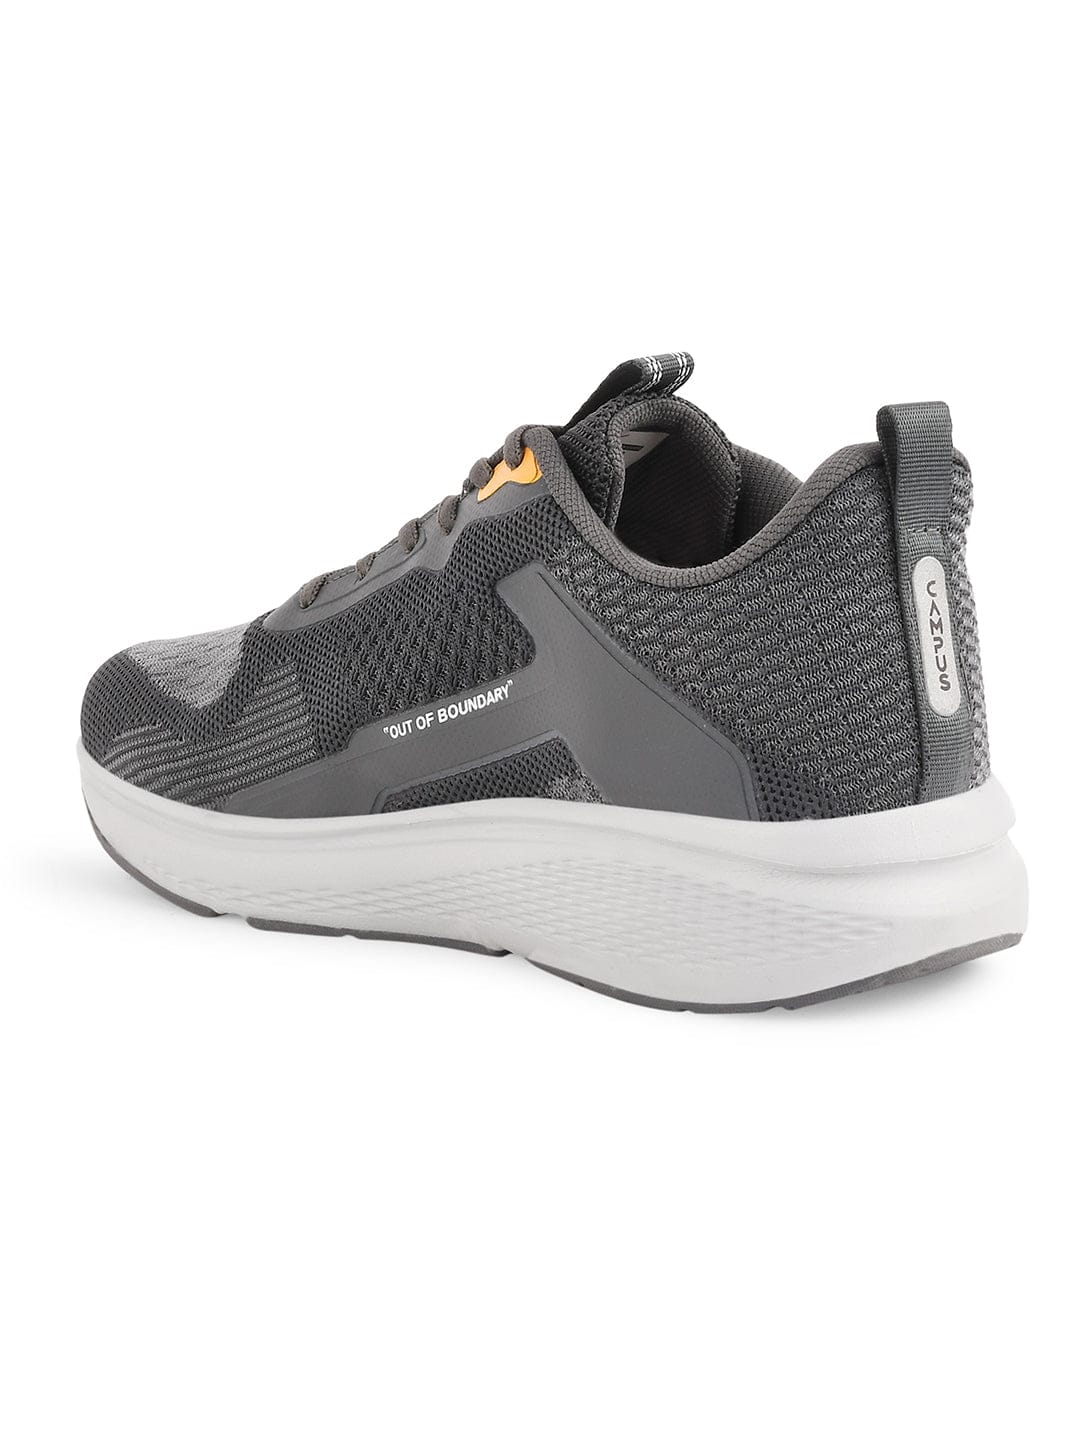 Buy PARKY Grey Men's Running Shoes online | Campus Shoes